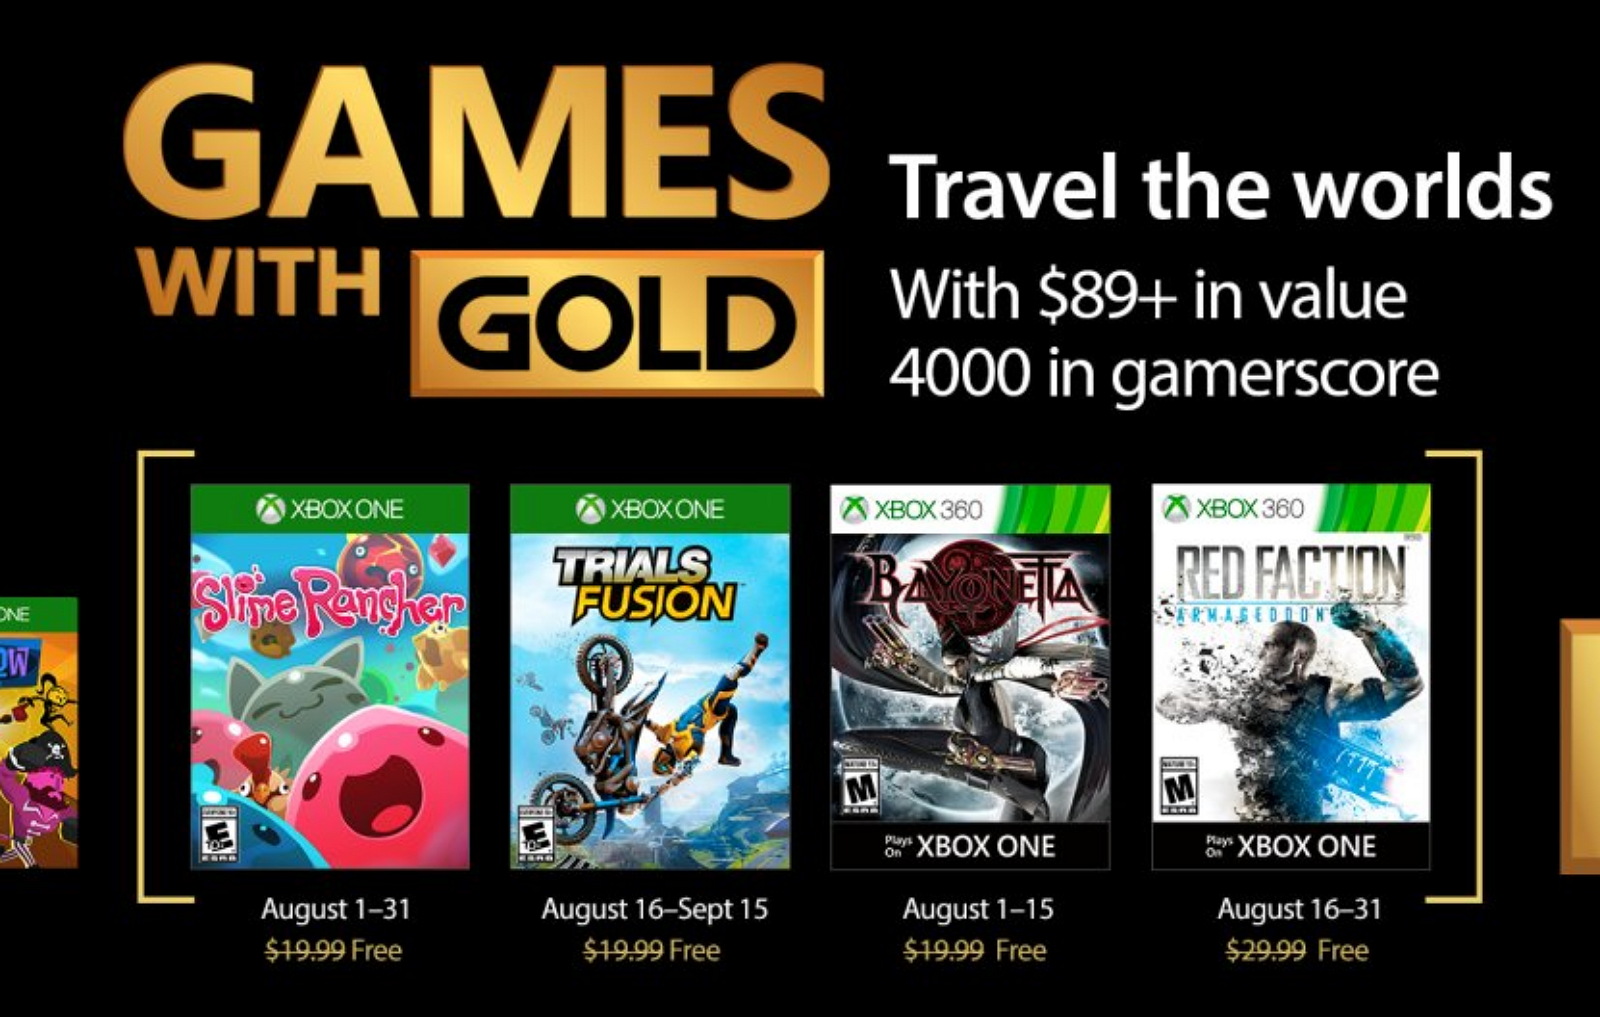 xbox live gold in combination with game pass